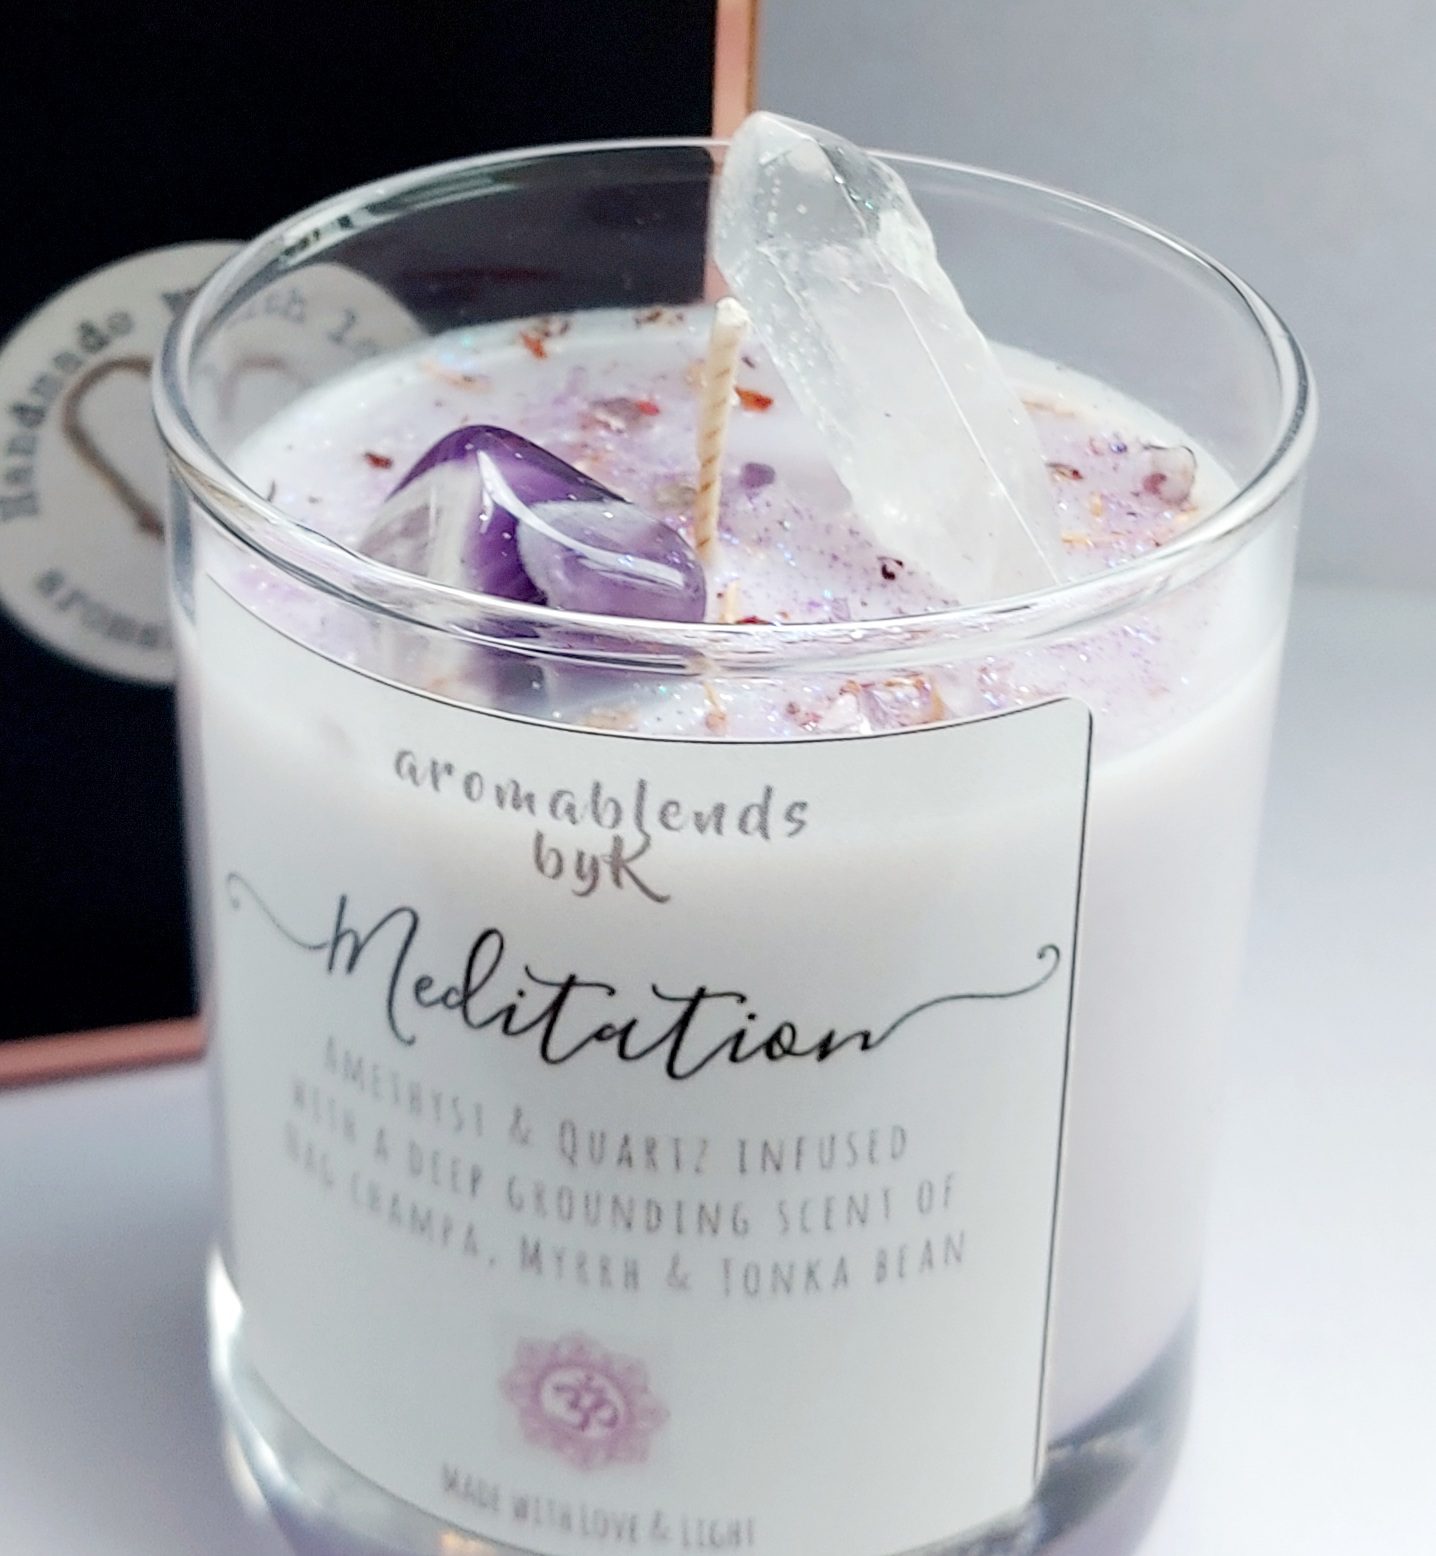 Mediation Aromatherapy Candle with Amethyst